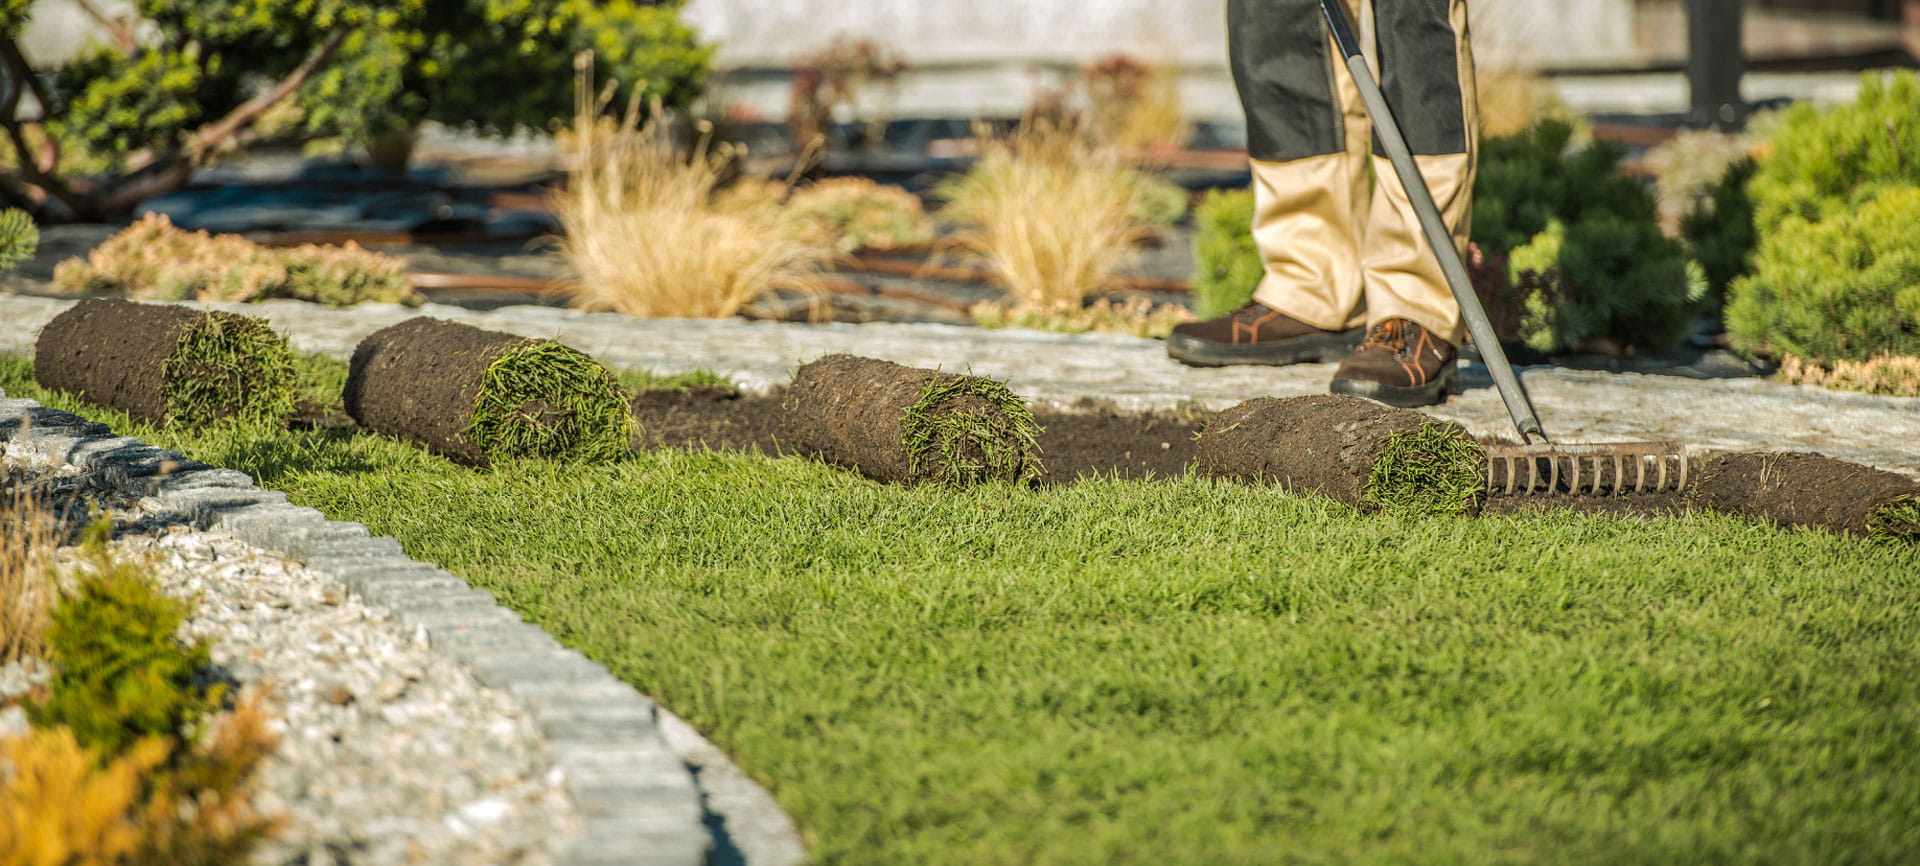 Could a Dry Creek Bed Save Your Soggy Yard?